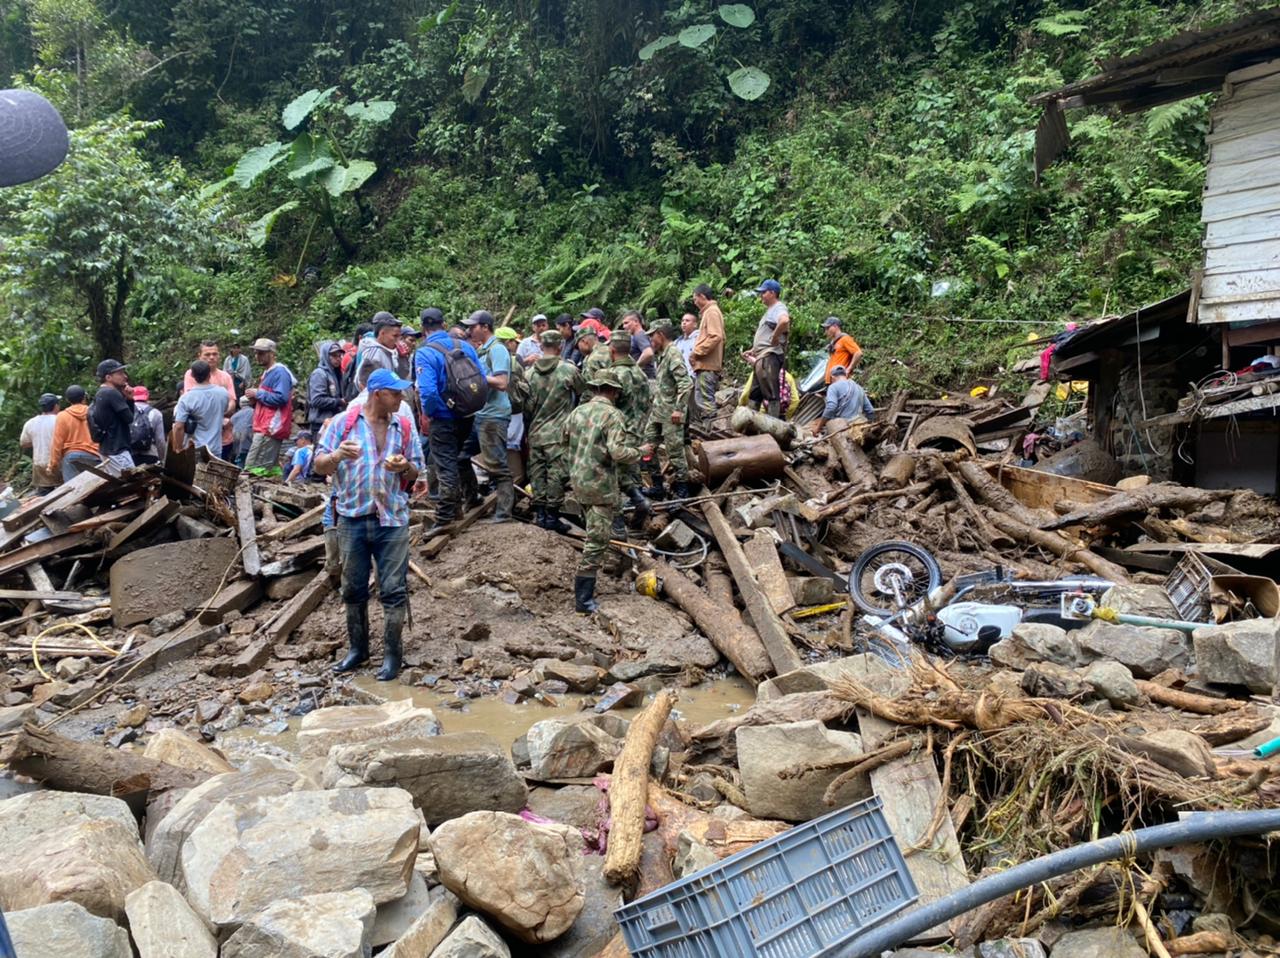 “Everyone screamed and wanted to get out”: Heartbreaking testimony of a survivor of the tragedy in Abriaquí